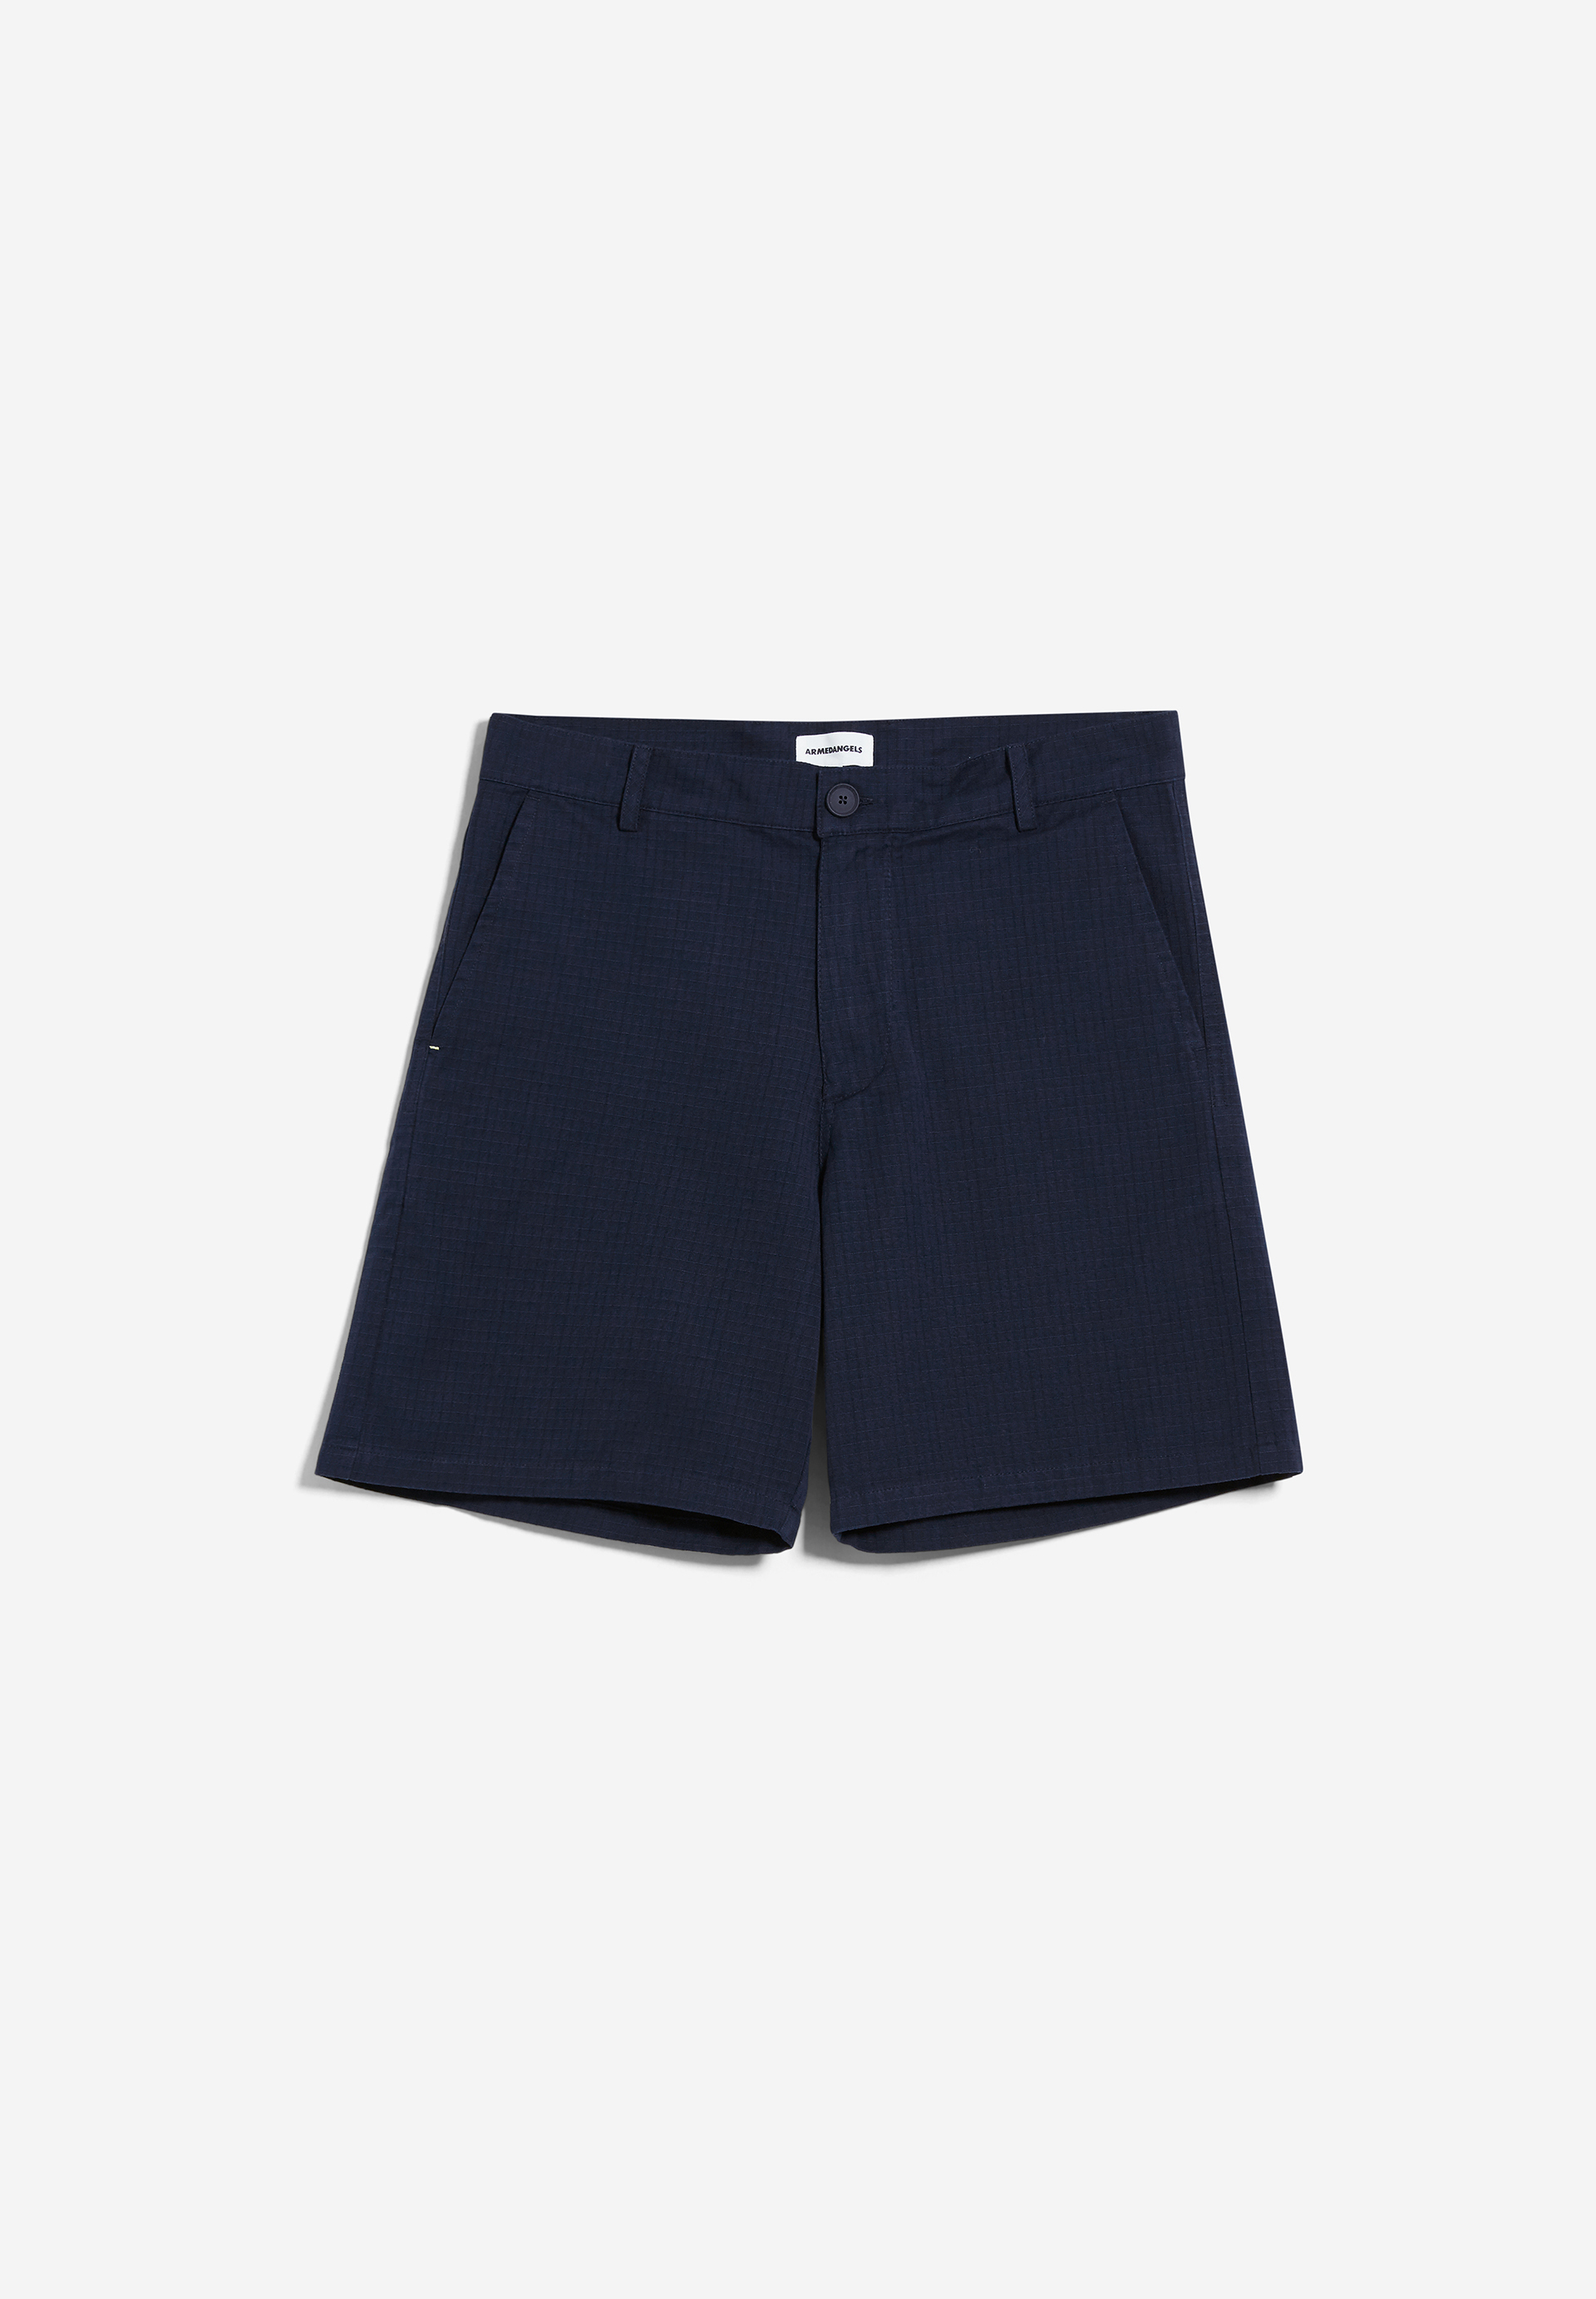 SOJAAN RIBSTOP Shorts Relaxed Fit made of Organic Cotton